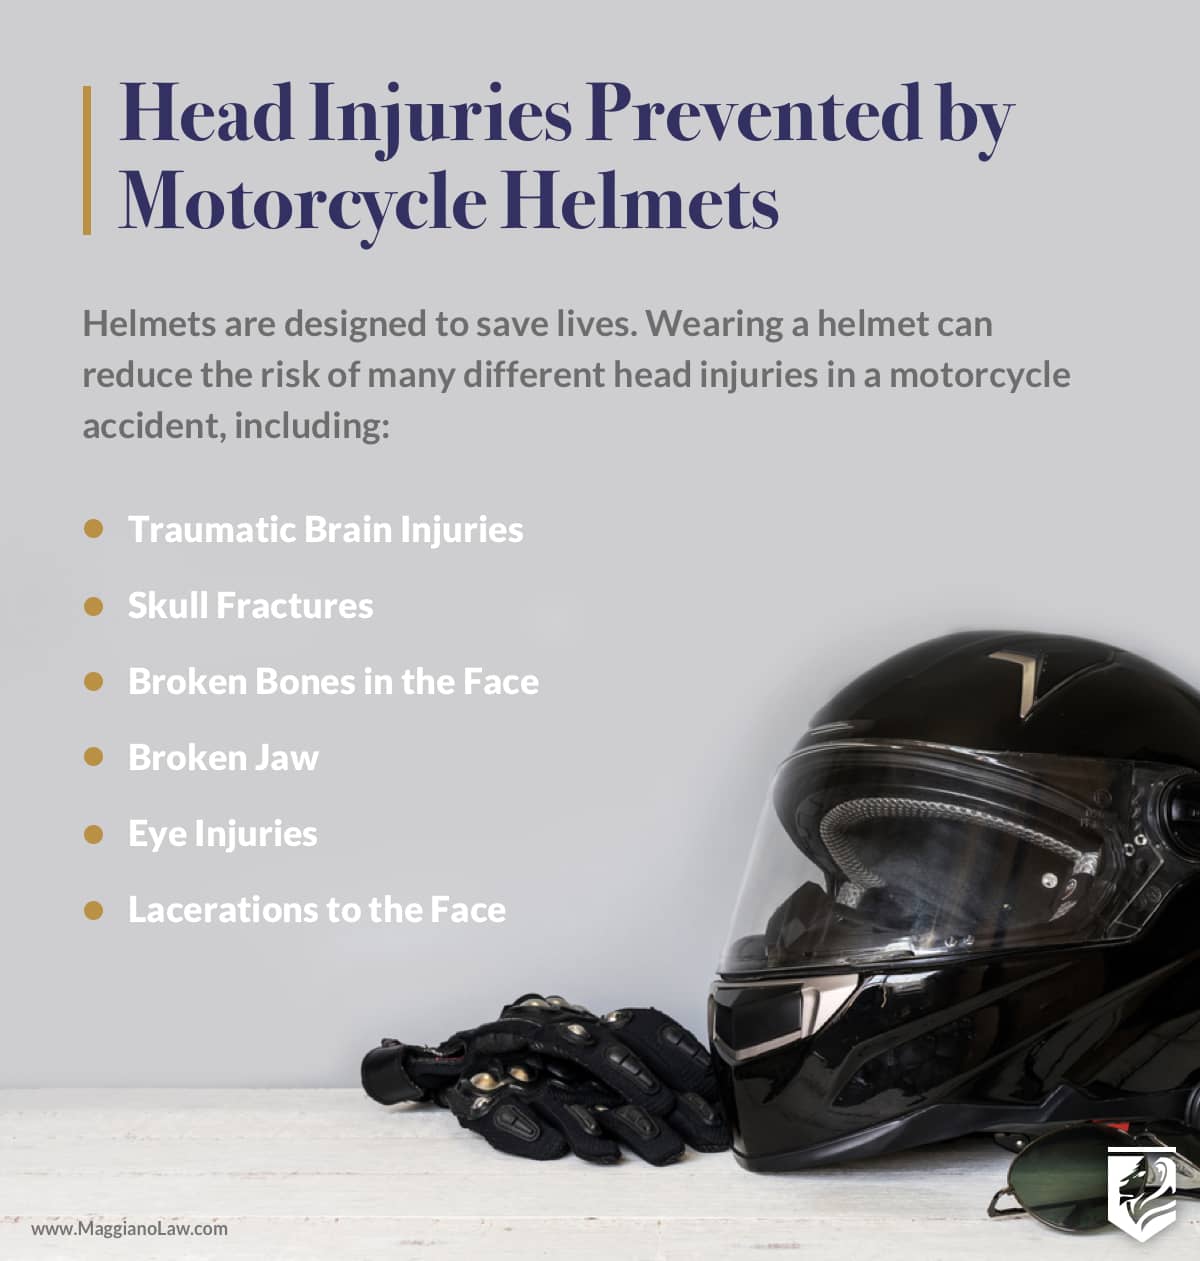 Head Injuries Prevented by Motorcycle Helmets | Maggiano, DiGirolamo and Lizzi